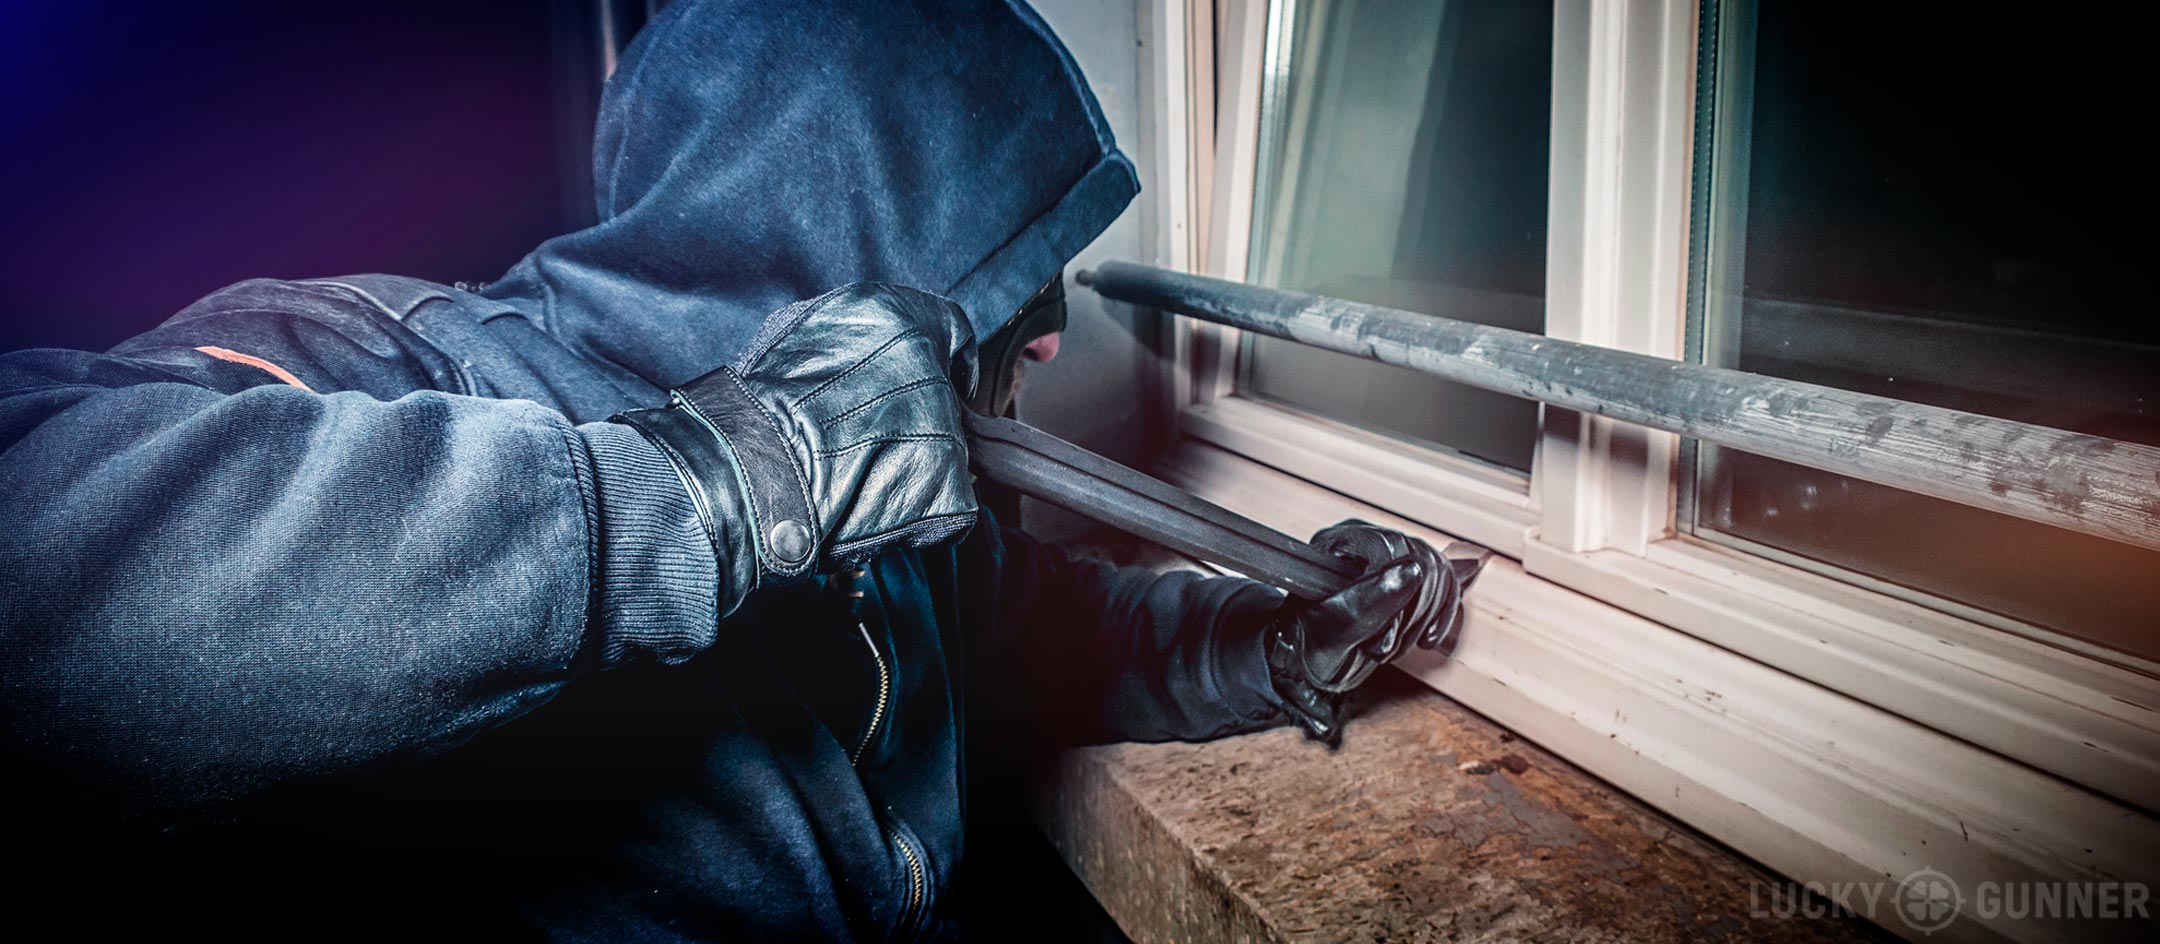 How to Prevent a Home Invasion - Lucky Gunner Lounge